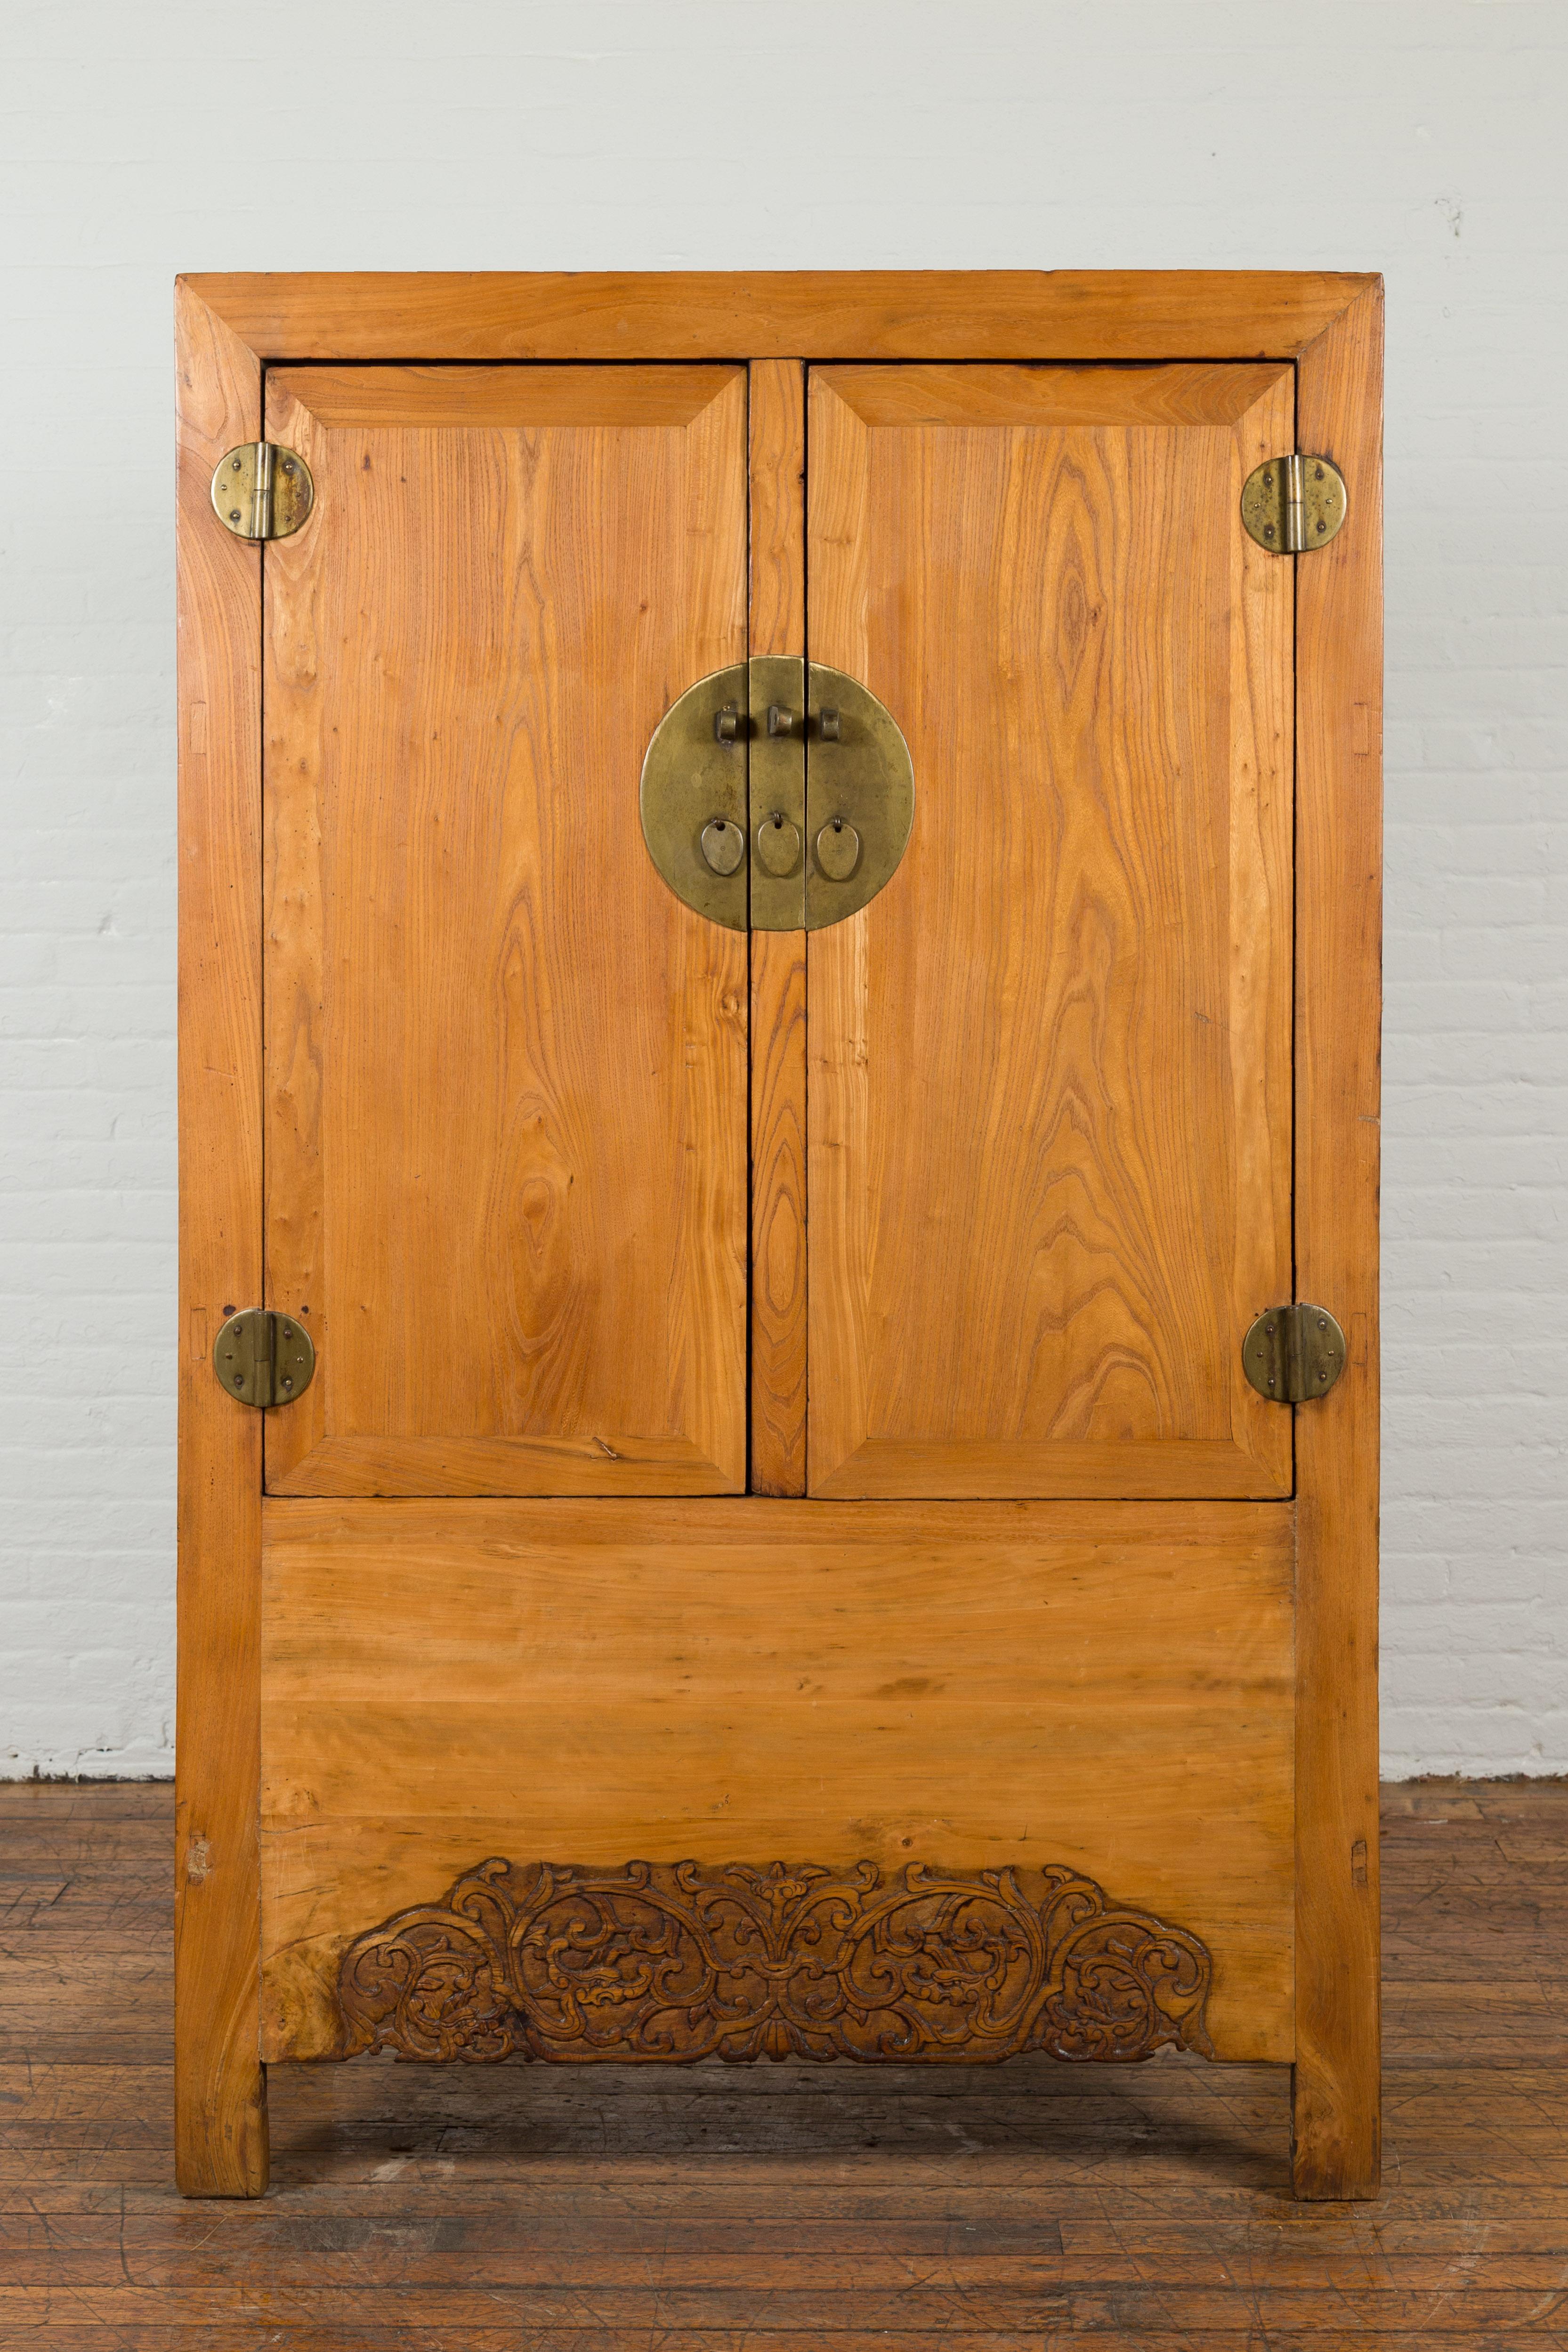 A Chinese vintage elmwood wedding cabinet from the mid 20th century with a carved lower apron, two hidden internal drawers and brass hardware. Featured in our vast cabinets collection, we currently have have two of these large vintage cabinets